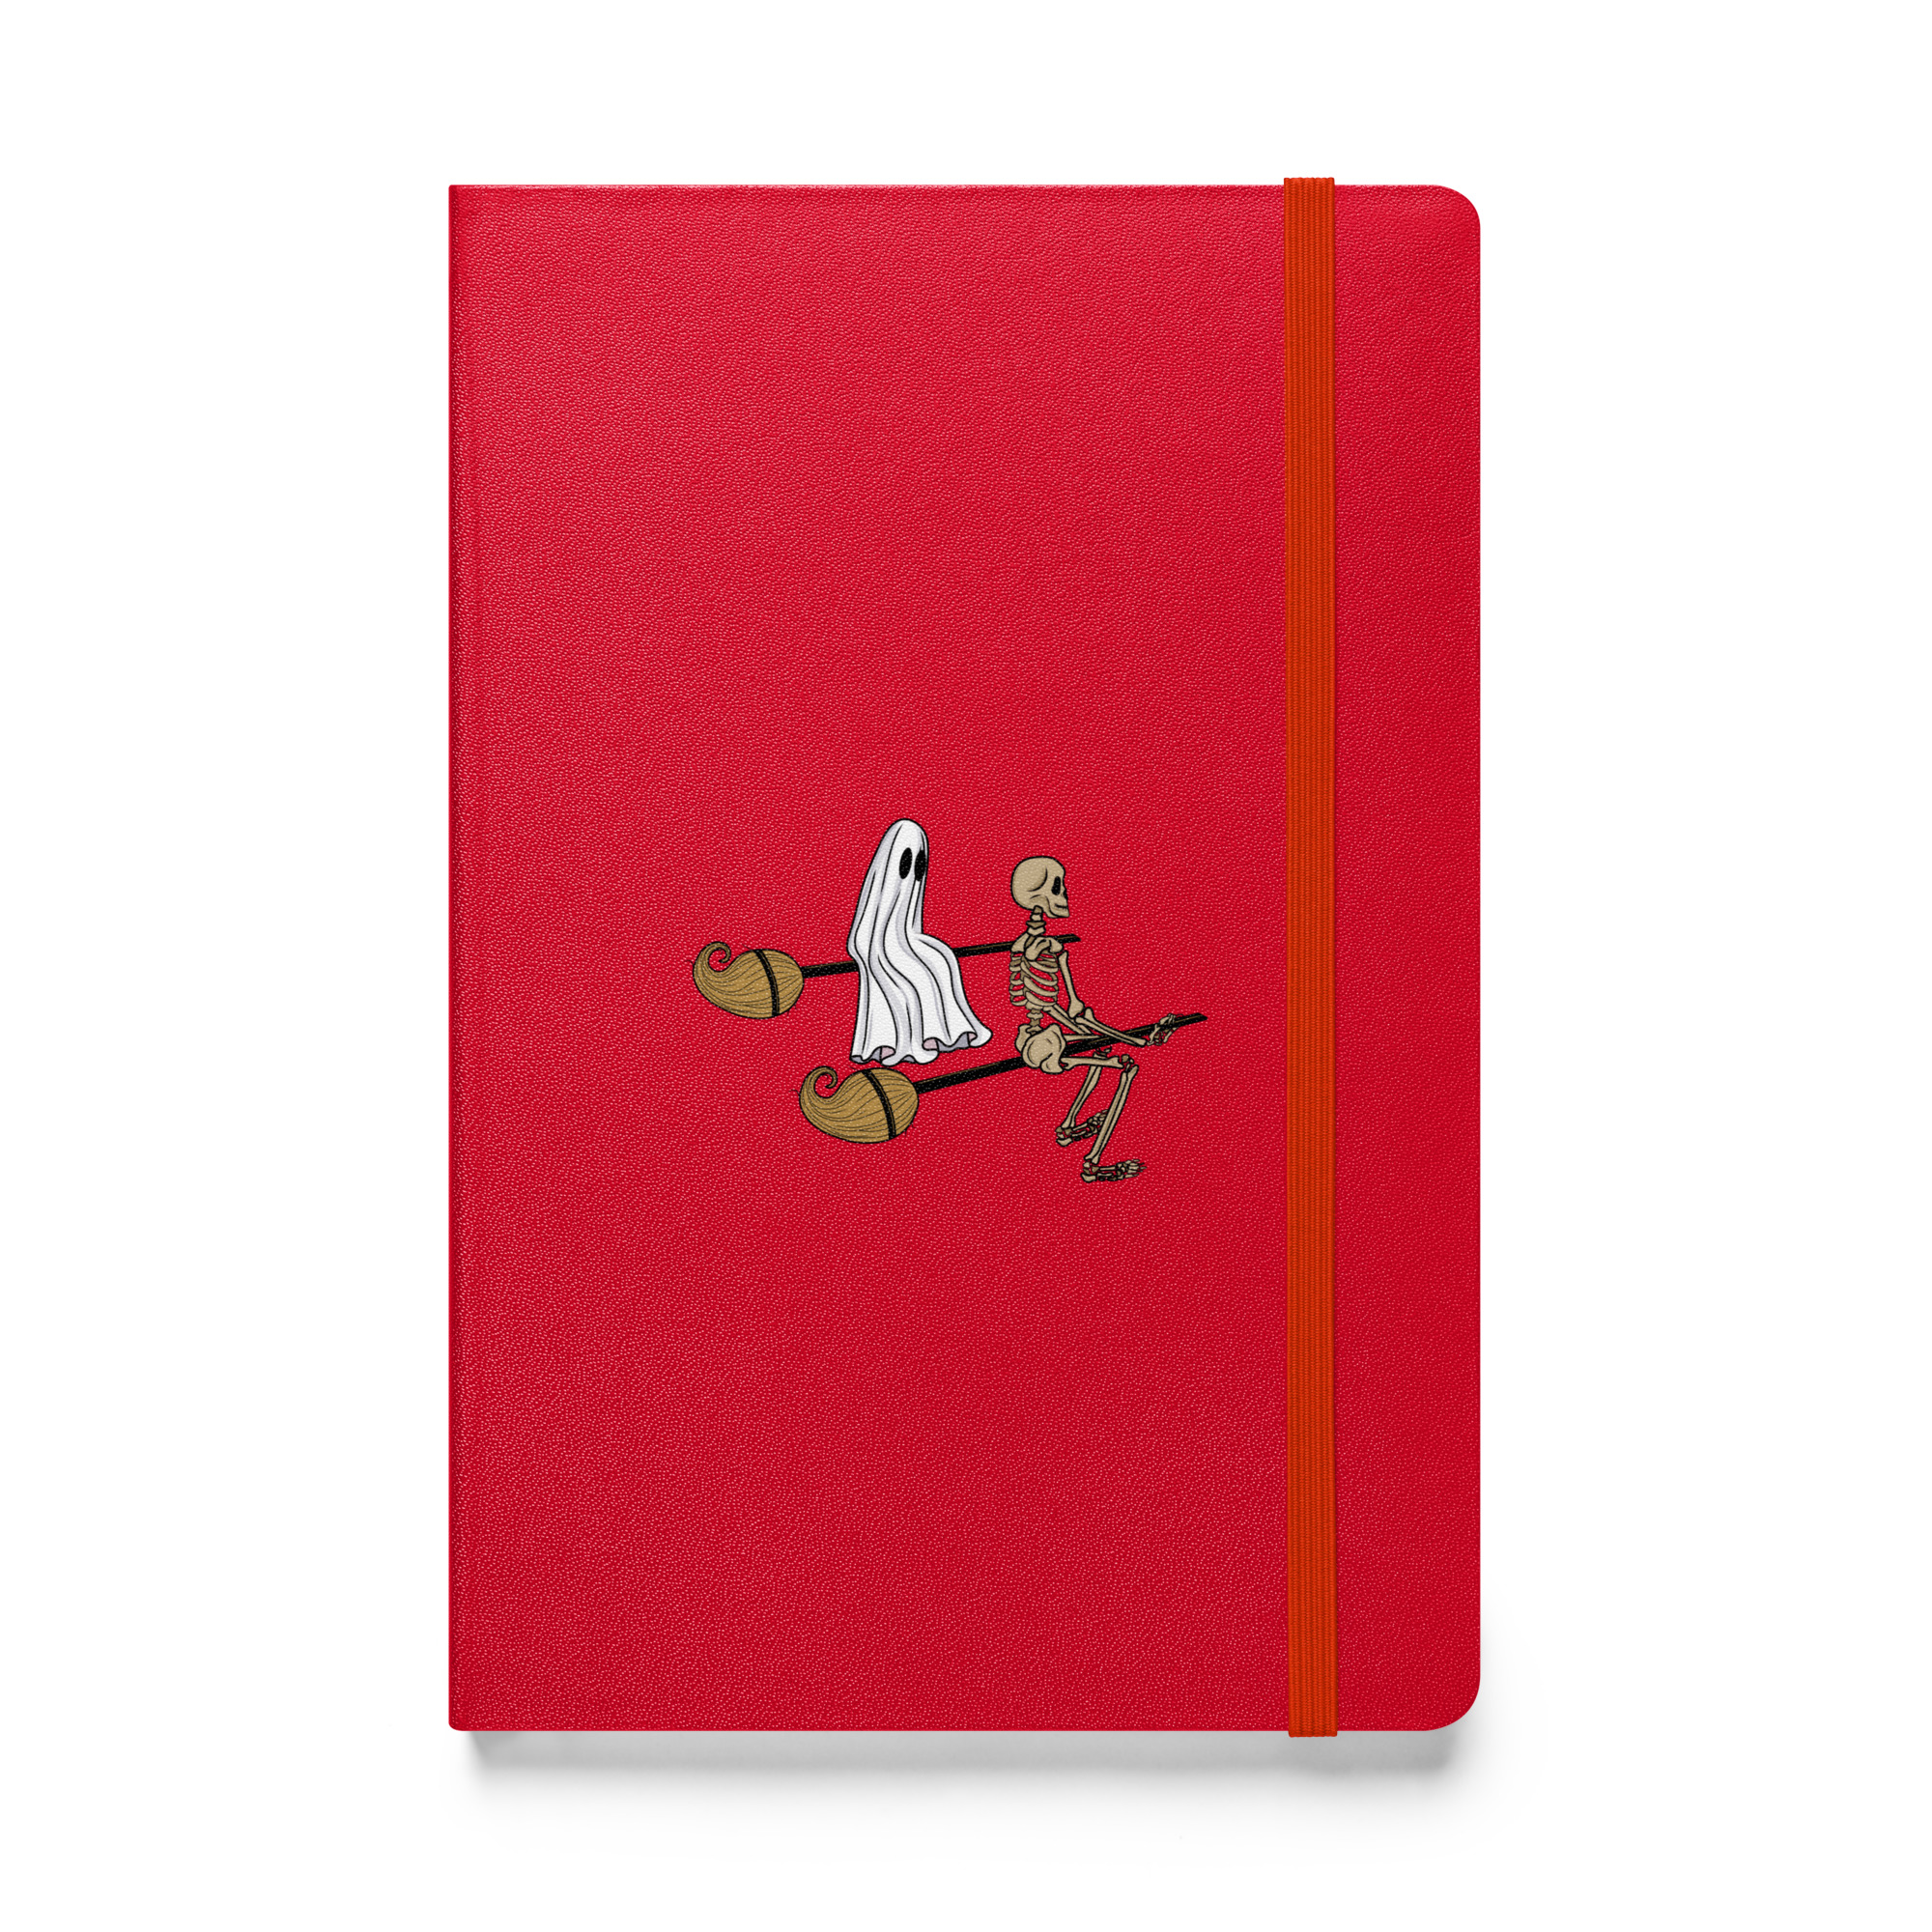 hardcover-bound-notebook-red-front-6537e6eef1c15.jpg